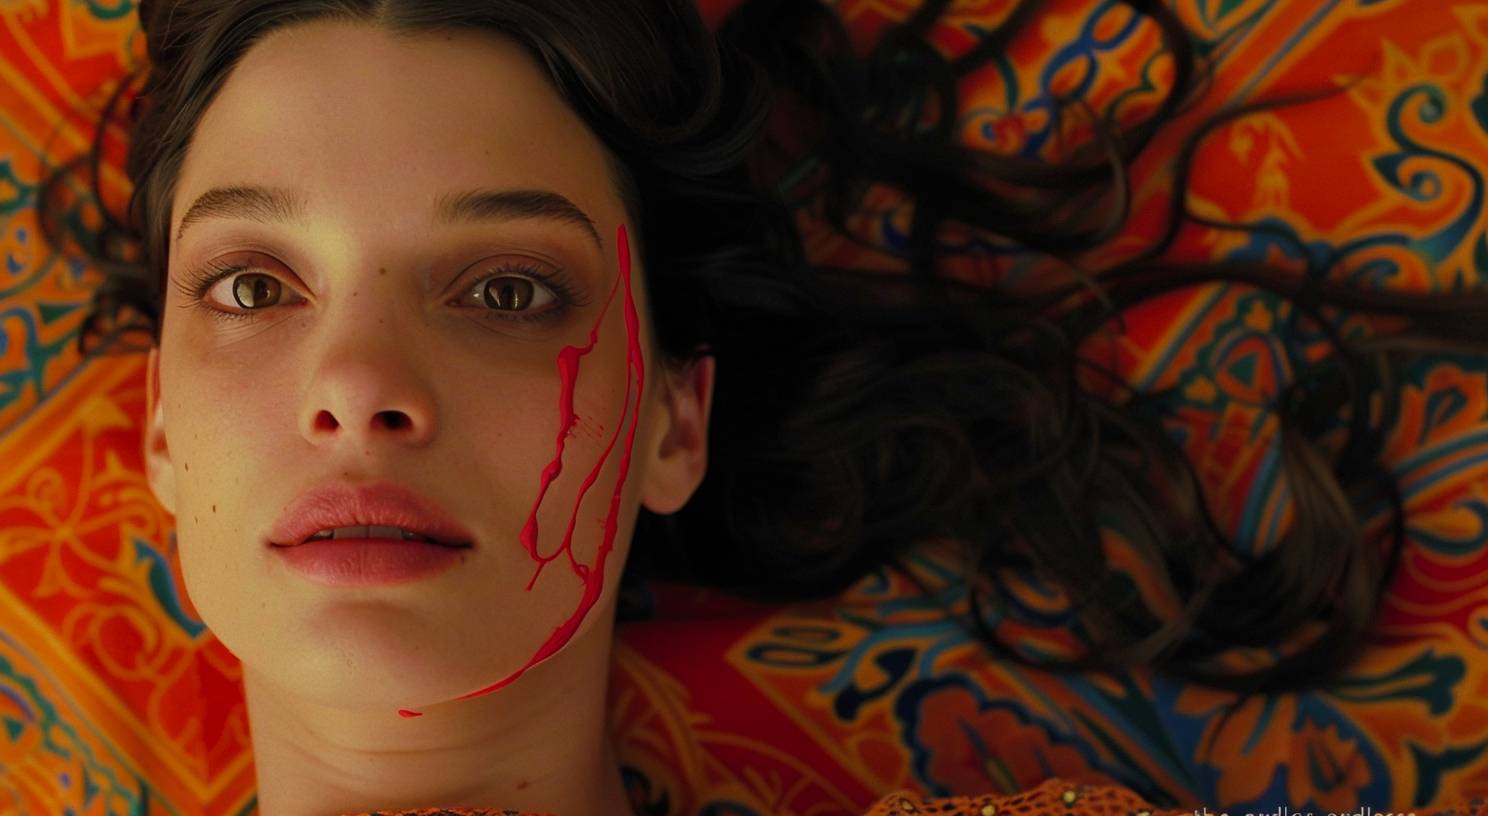 Screengrab from the film 'The Endless Dream' by Paul Verhoeven. A beautiful woman with dark hair and brown eyes laying on an orange patterned background in Greek style art, a red line of paint running down her cheek, painted in vibrant colors, close-up shot, symmetrical composition, surrealism, epic scene, wide angle